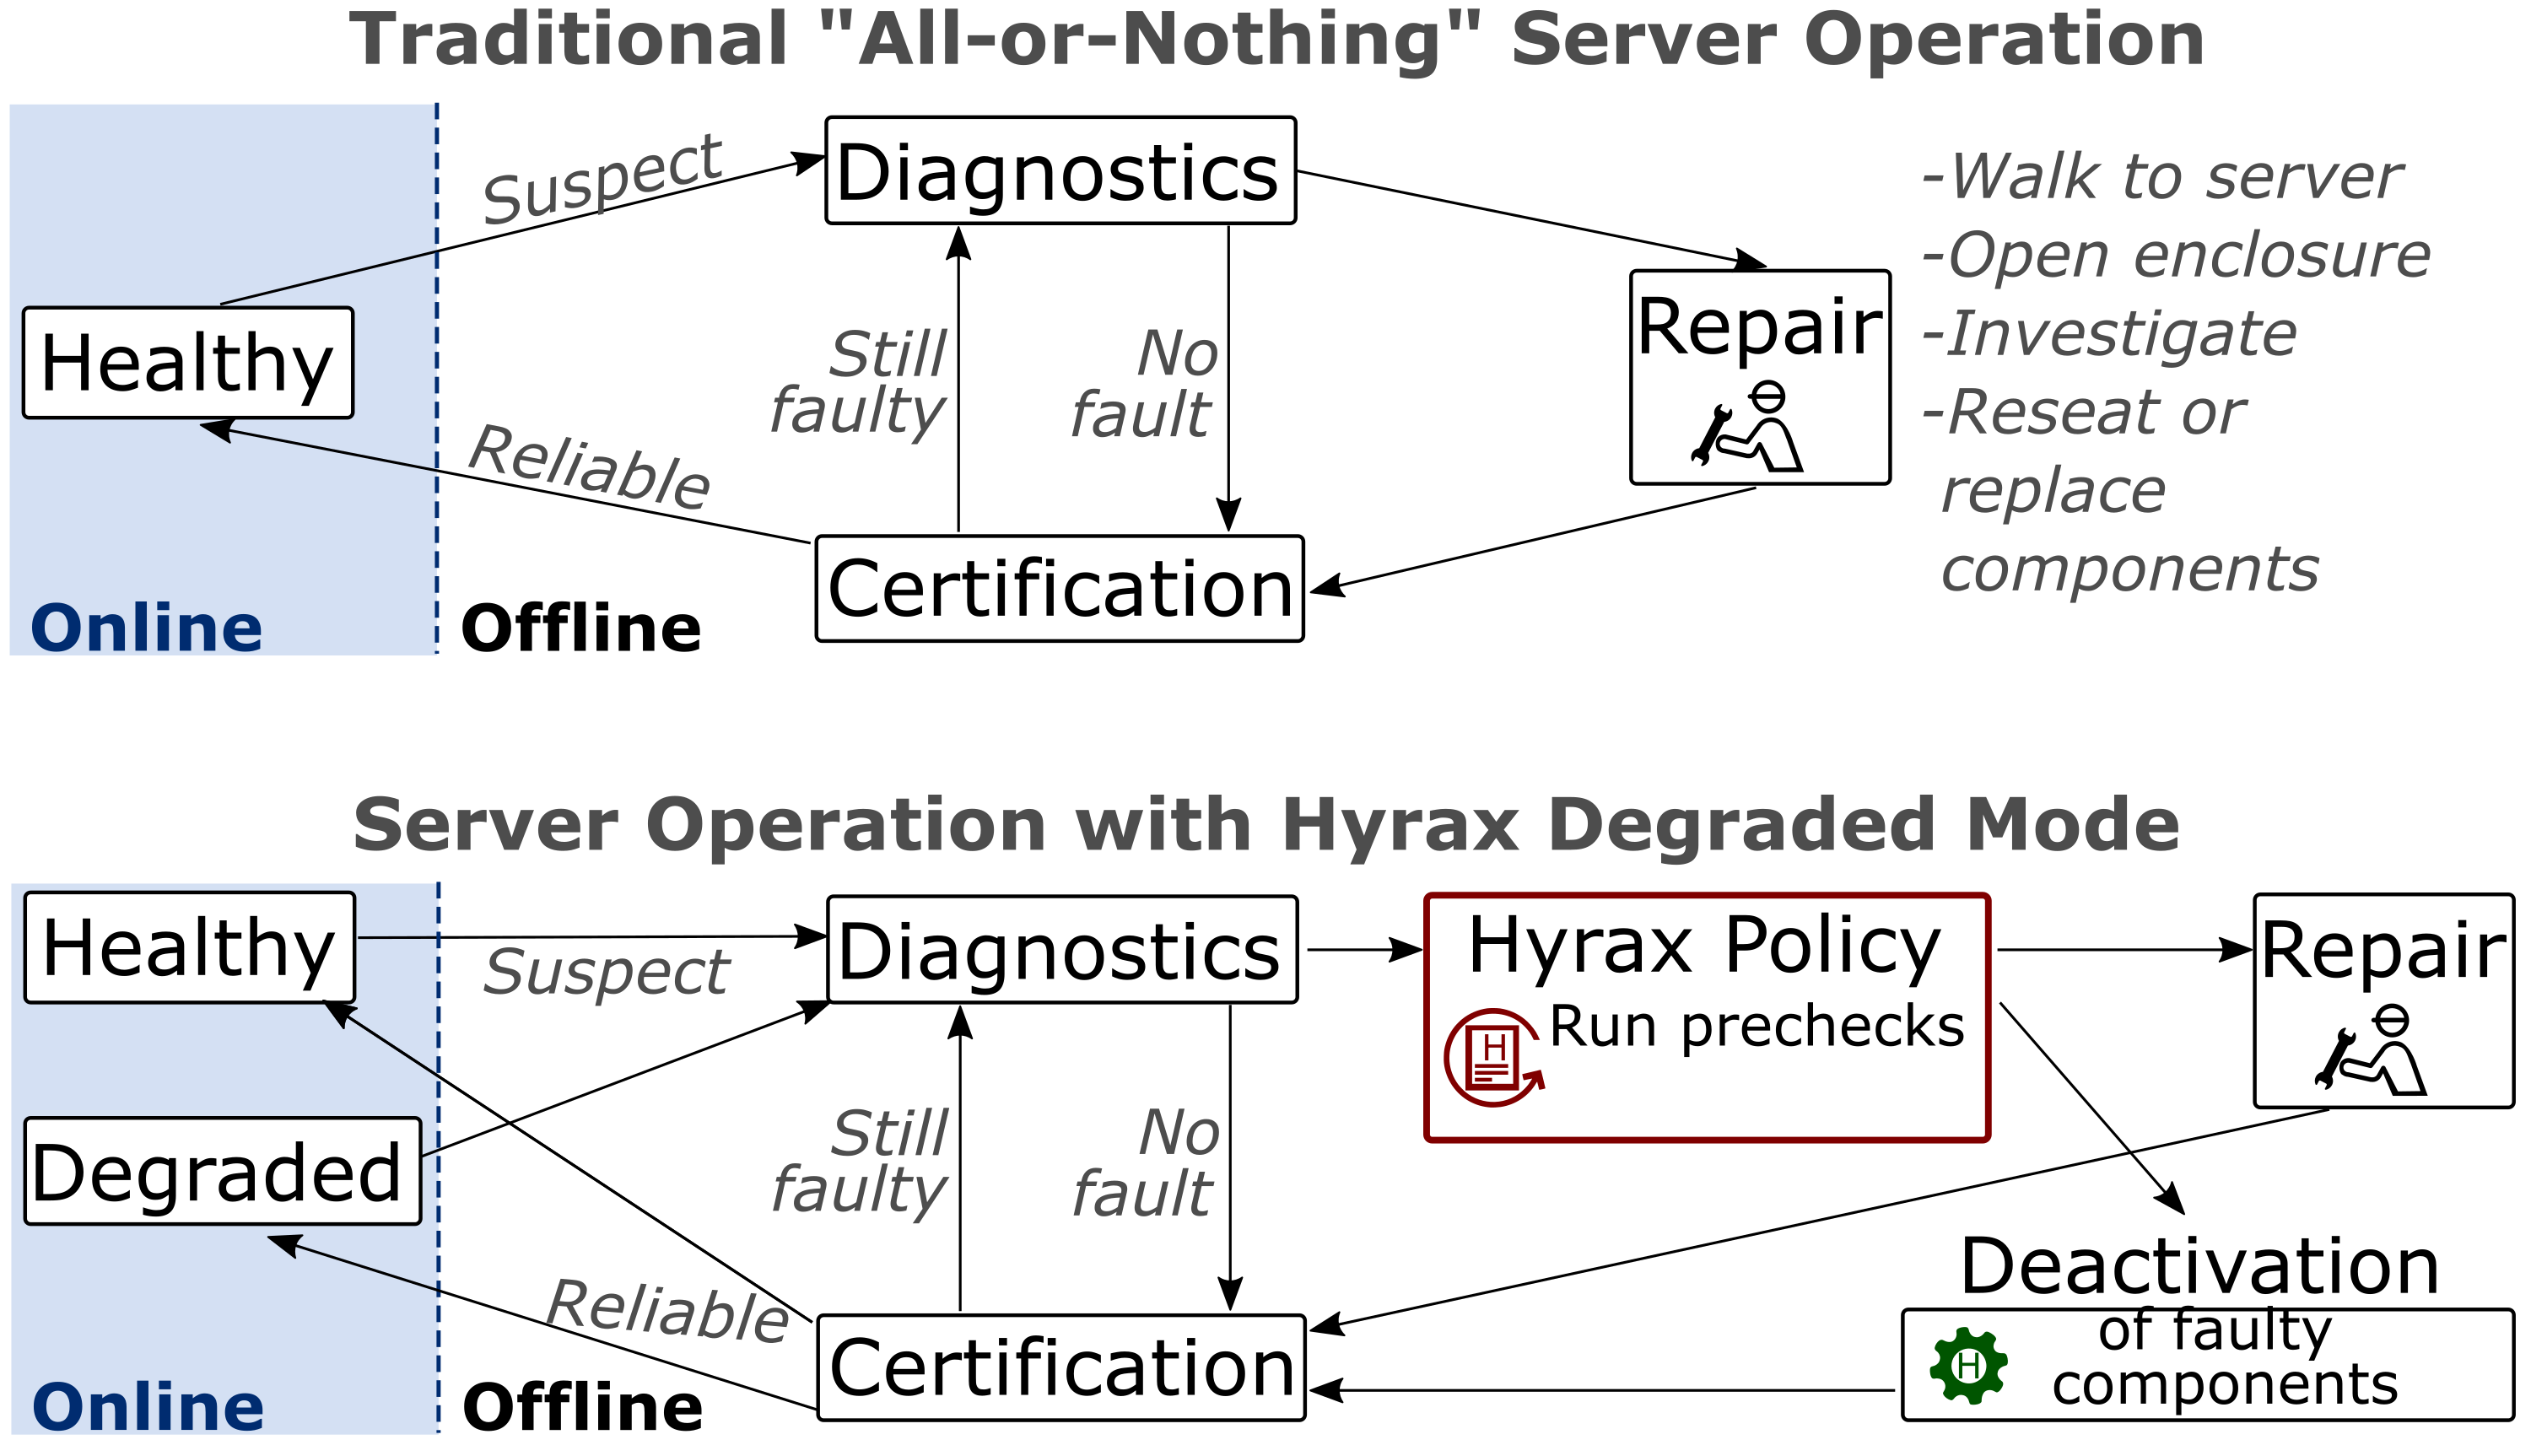 Figure 1. Two images that show server states, with arrows indicating transitions between them. The top image shows server states for an all-or-nothing operation. The bottom image shows Hyrax. Compared with the all-or-nothing operation, the Hyrax proposal adds another online server state and two additional steps in the offline state transitions. 